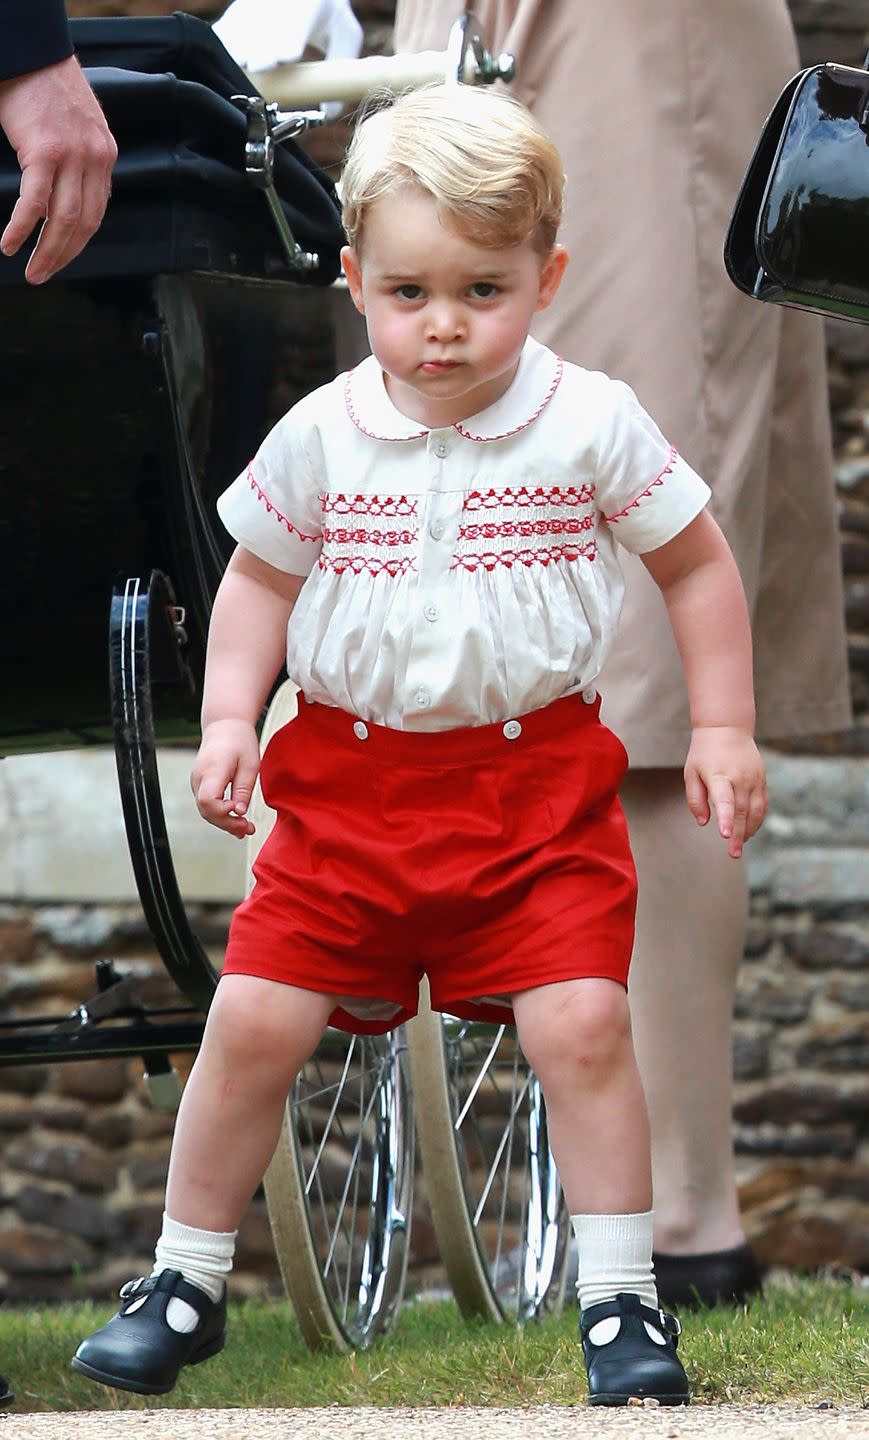 <p>Prince George, er, "greets" the media following the christening of his baby sister, Princess Charlotte, at the Church of St. Mary Magdalene in Sandringham.</p>